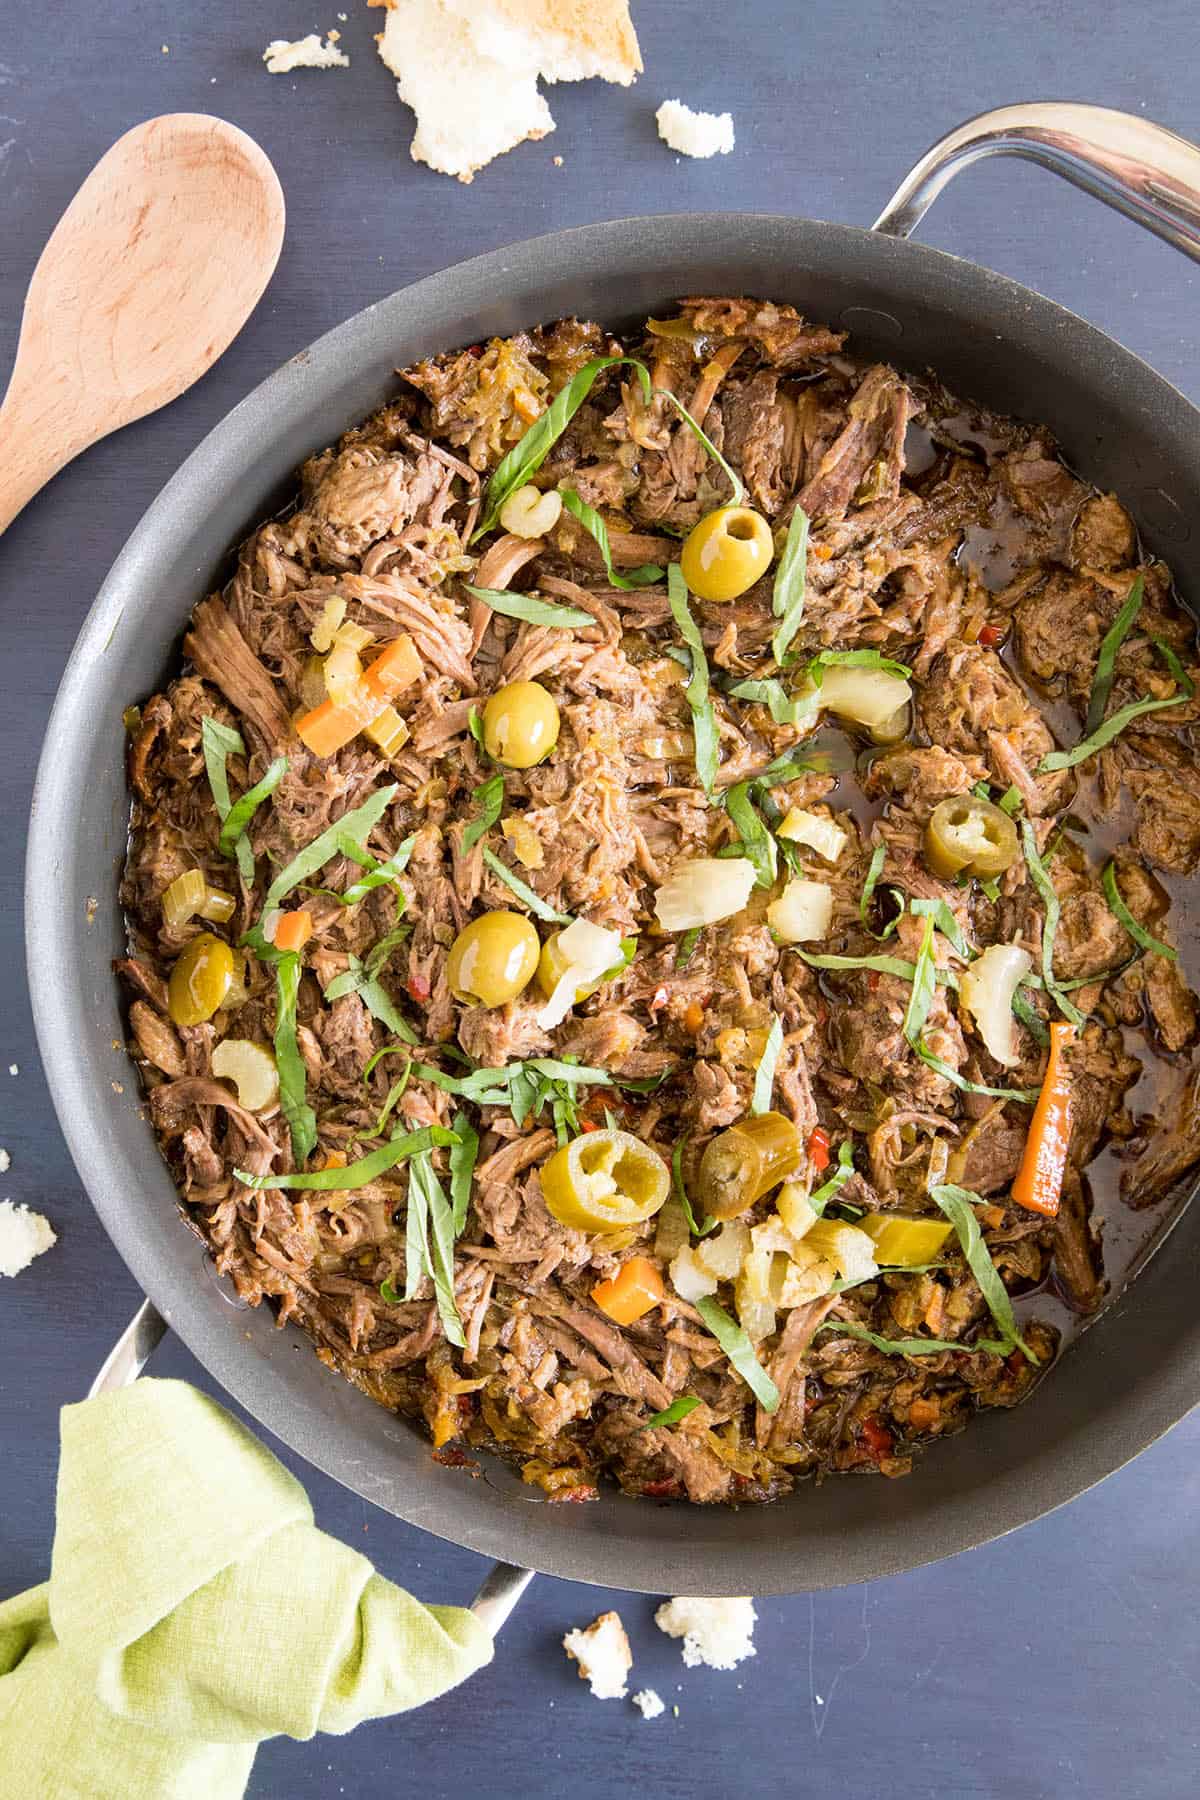 Feisty Italian Slow Cooker Beef Roast - Set it and forget it.